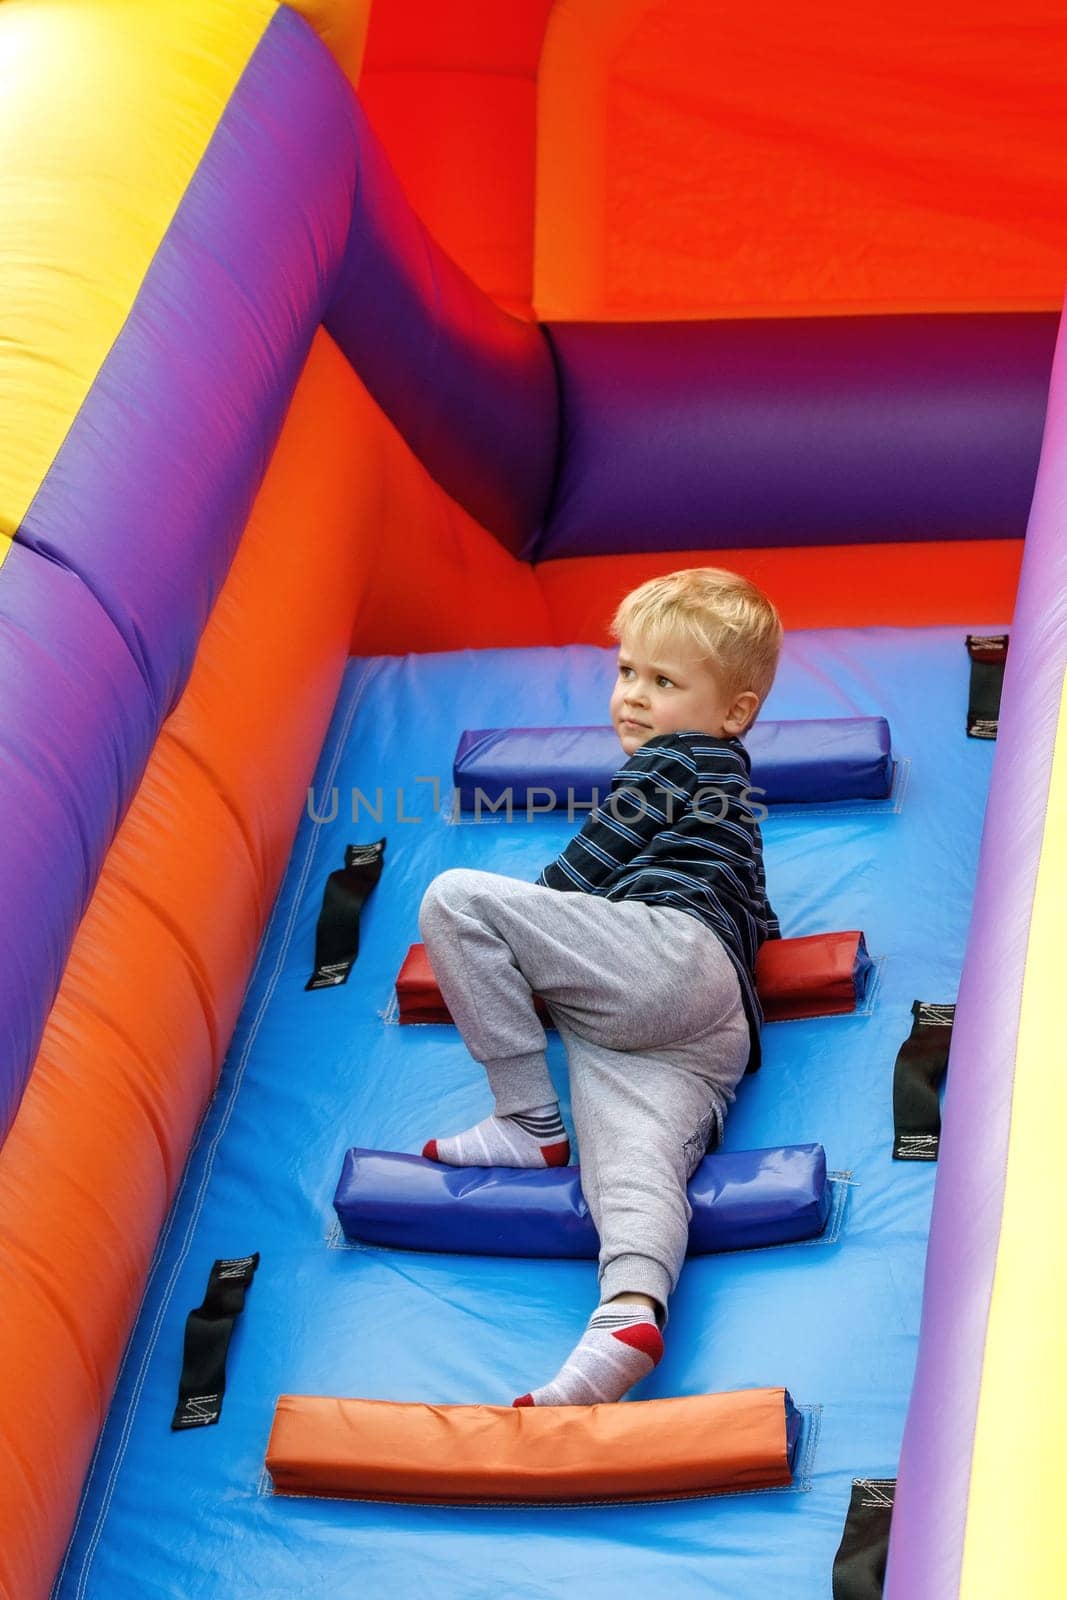 A cute boy climbs a colorful ladder on a high inflatable trampoline and looks into the distance.